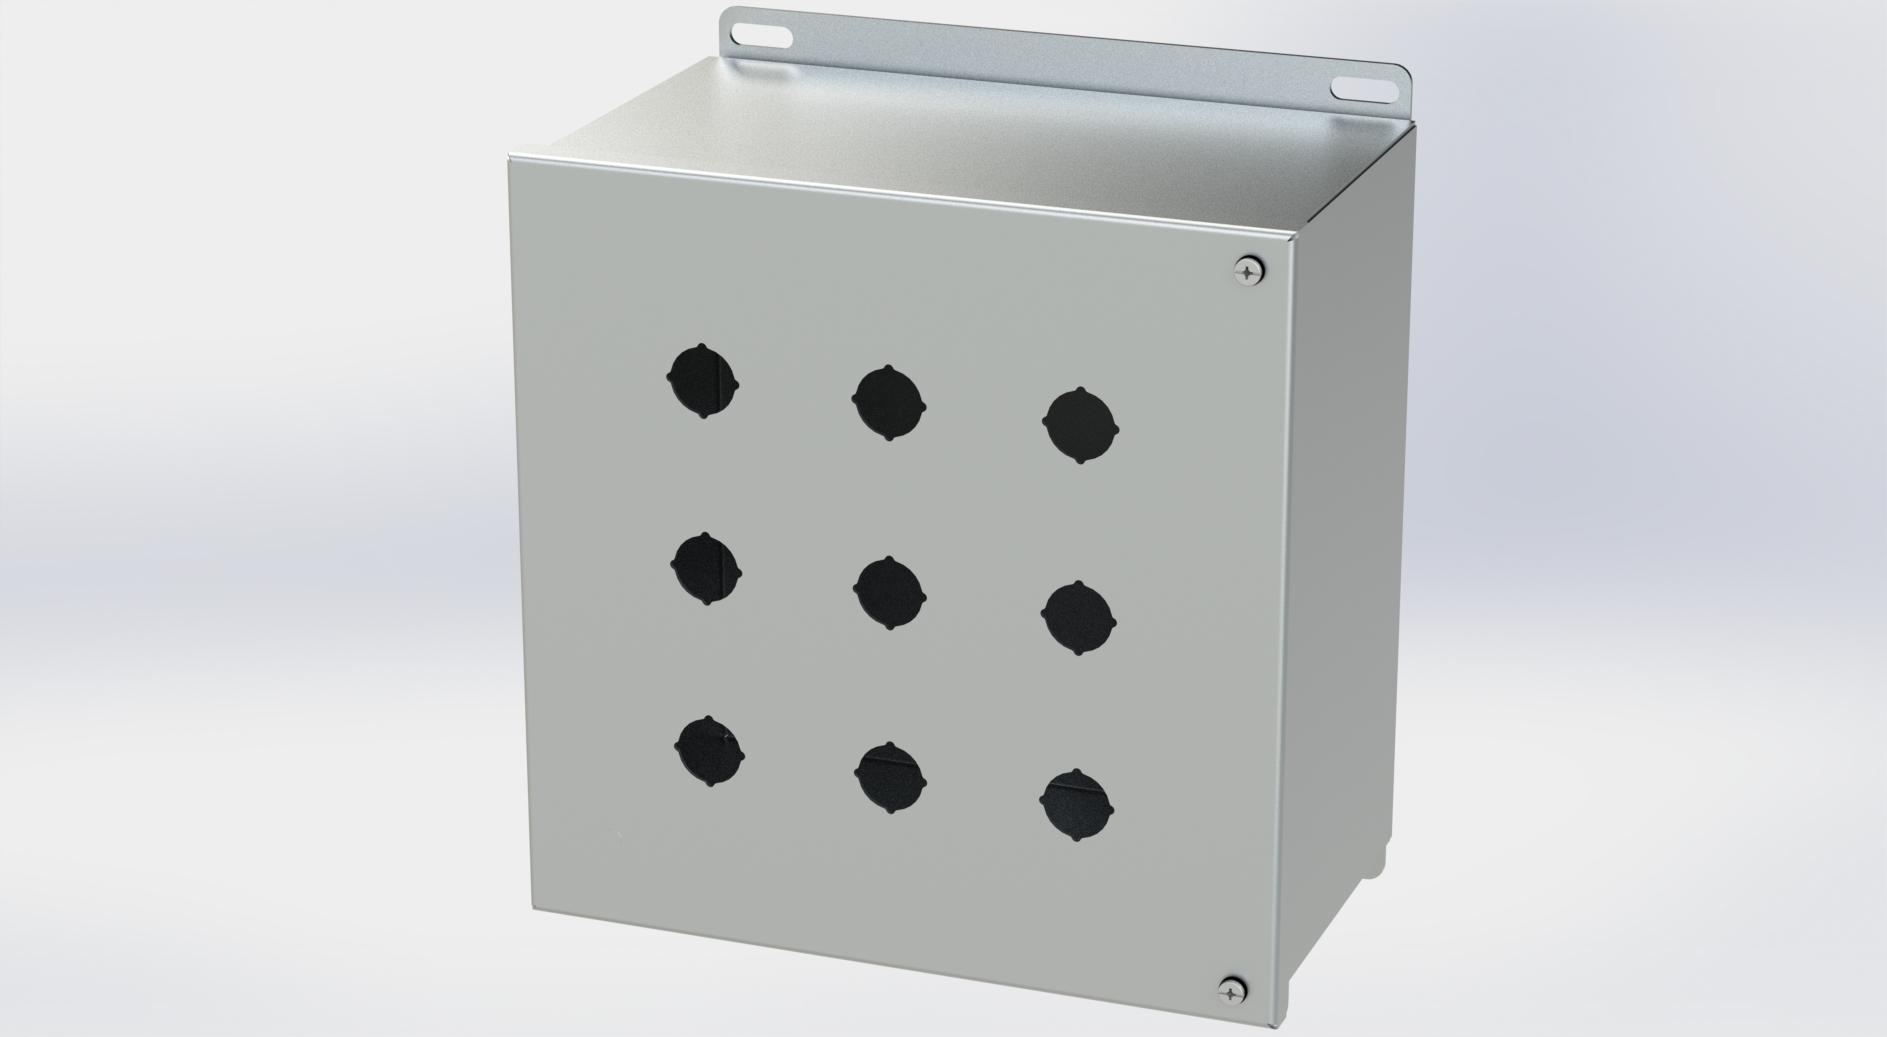 Saginaw Control SCE-9PBHSSI S.S. PB Enclosure, Height:10.13", Width:10.00", Depth:6.00", #4 brushed finish on all exterior surfaces. Optional sub-panels are powder coated white.